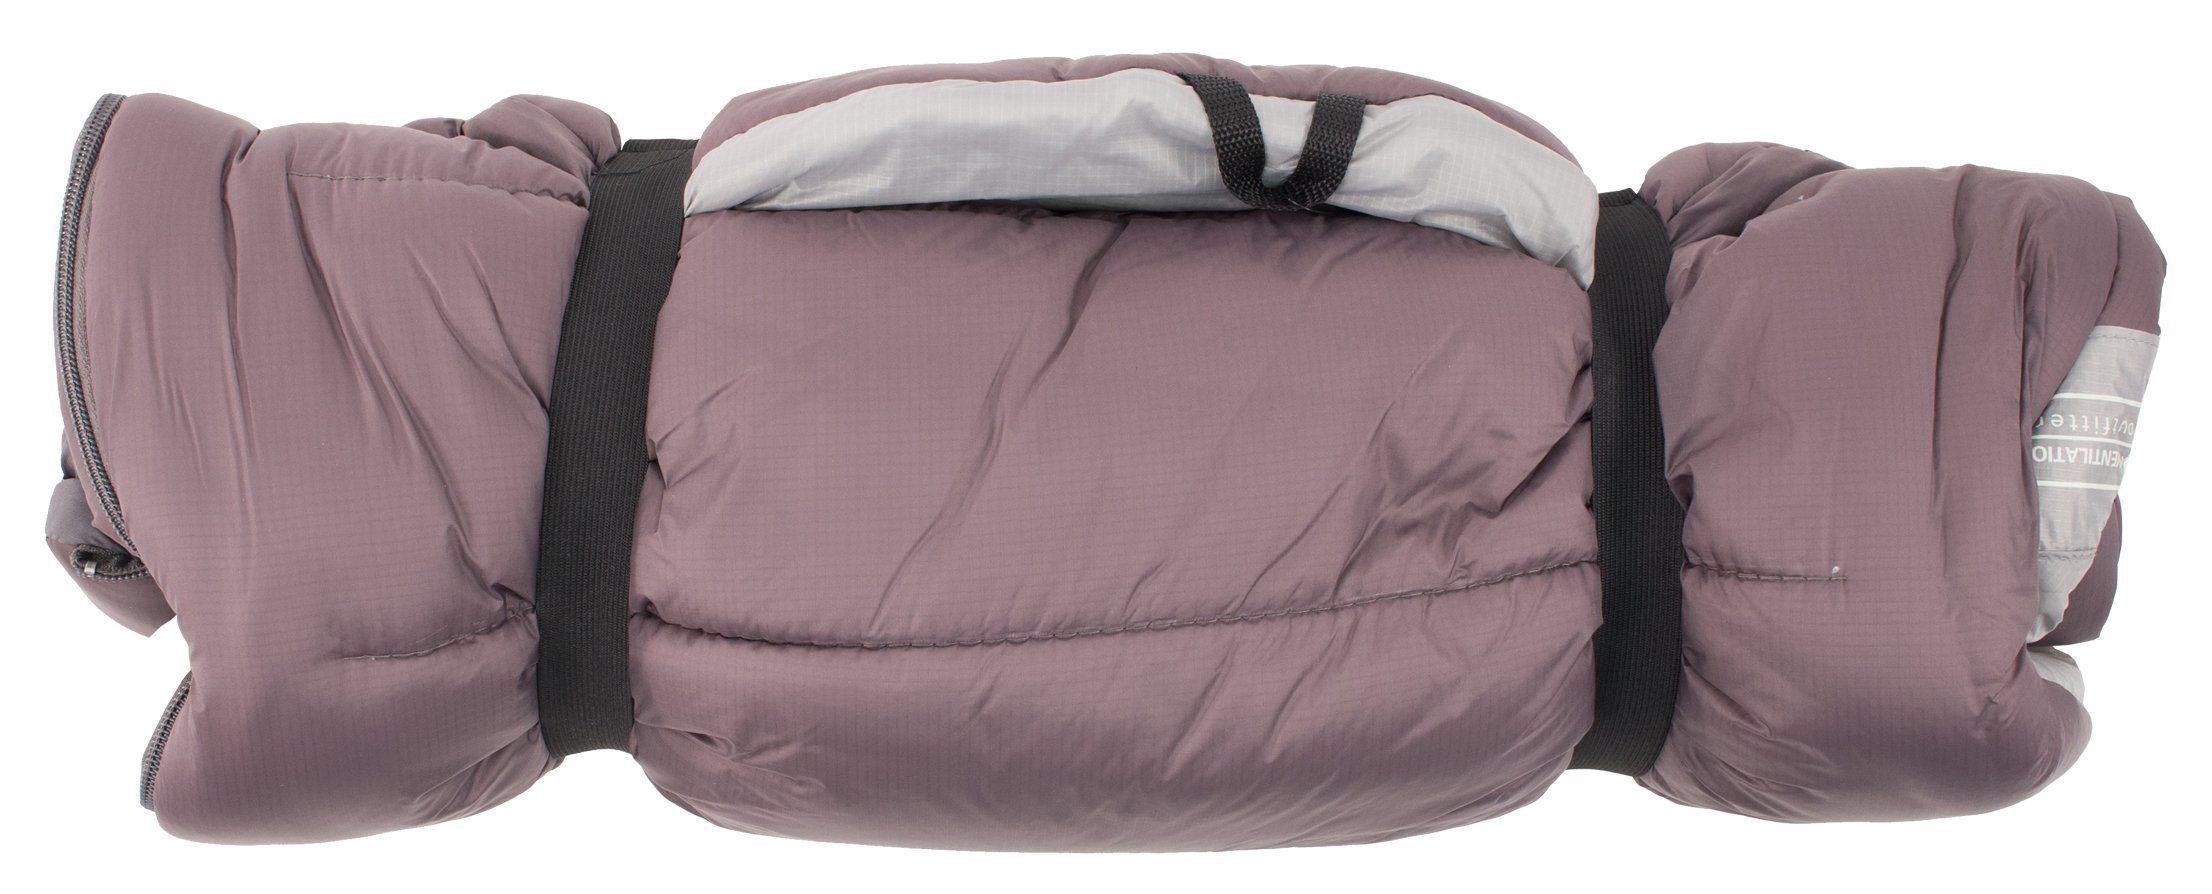 Dog Helios ® 'Trail-Barker' Multi-Surface Water-Resistant Travel Camping Dog Bed  